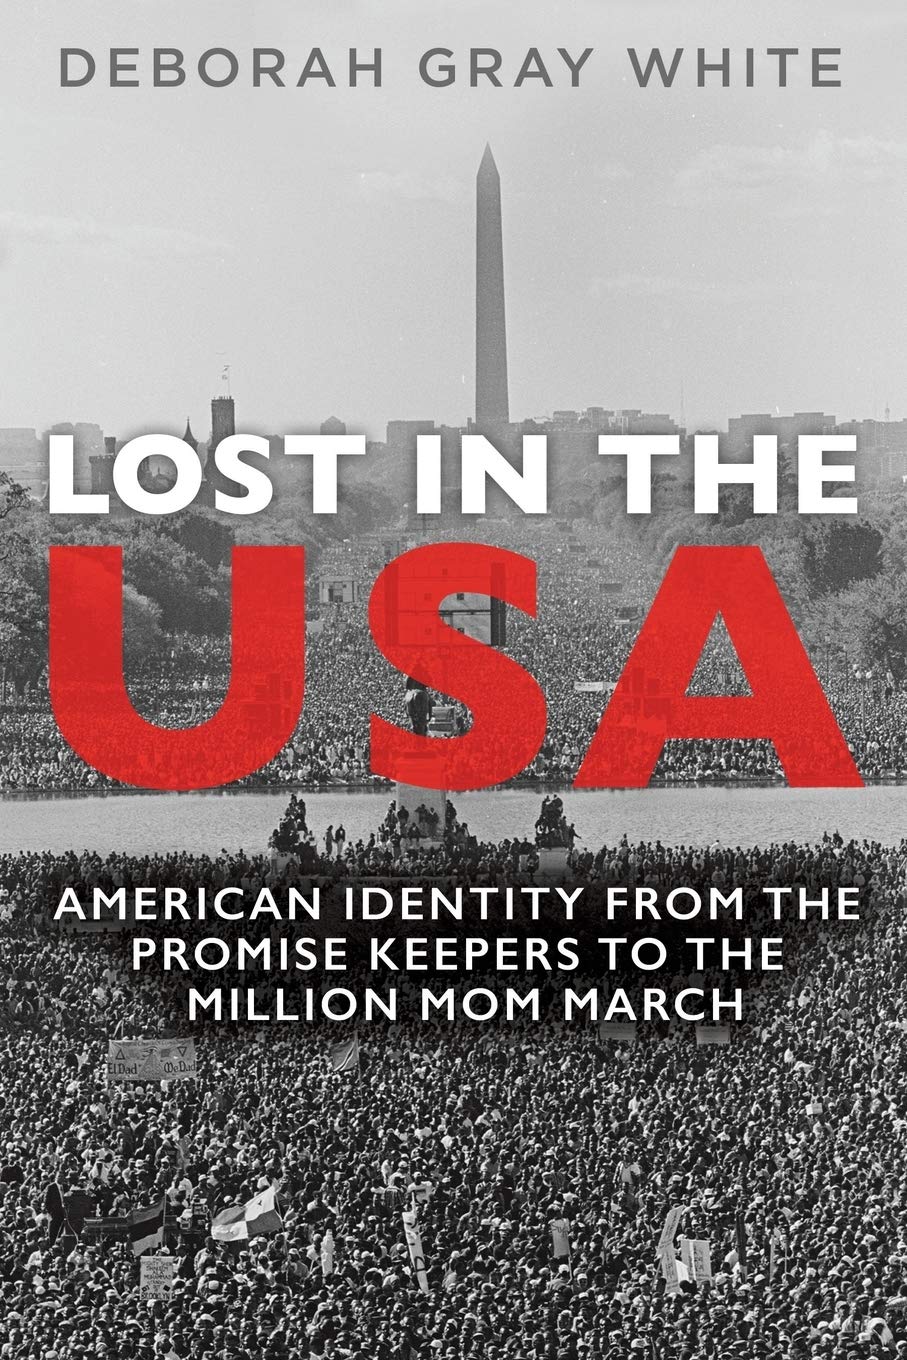 Book cover of Lost in the Usa: American Identity from the promise keepers to the million mom march by Deborah Gray White. It is illustrated with a black and white photo of thousands, perhaps tens of thousands, of people gathered in front of the Washington Monument in Washington, D.C.